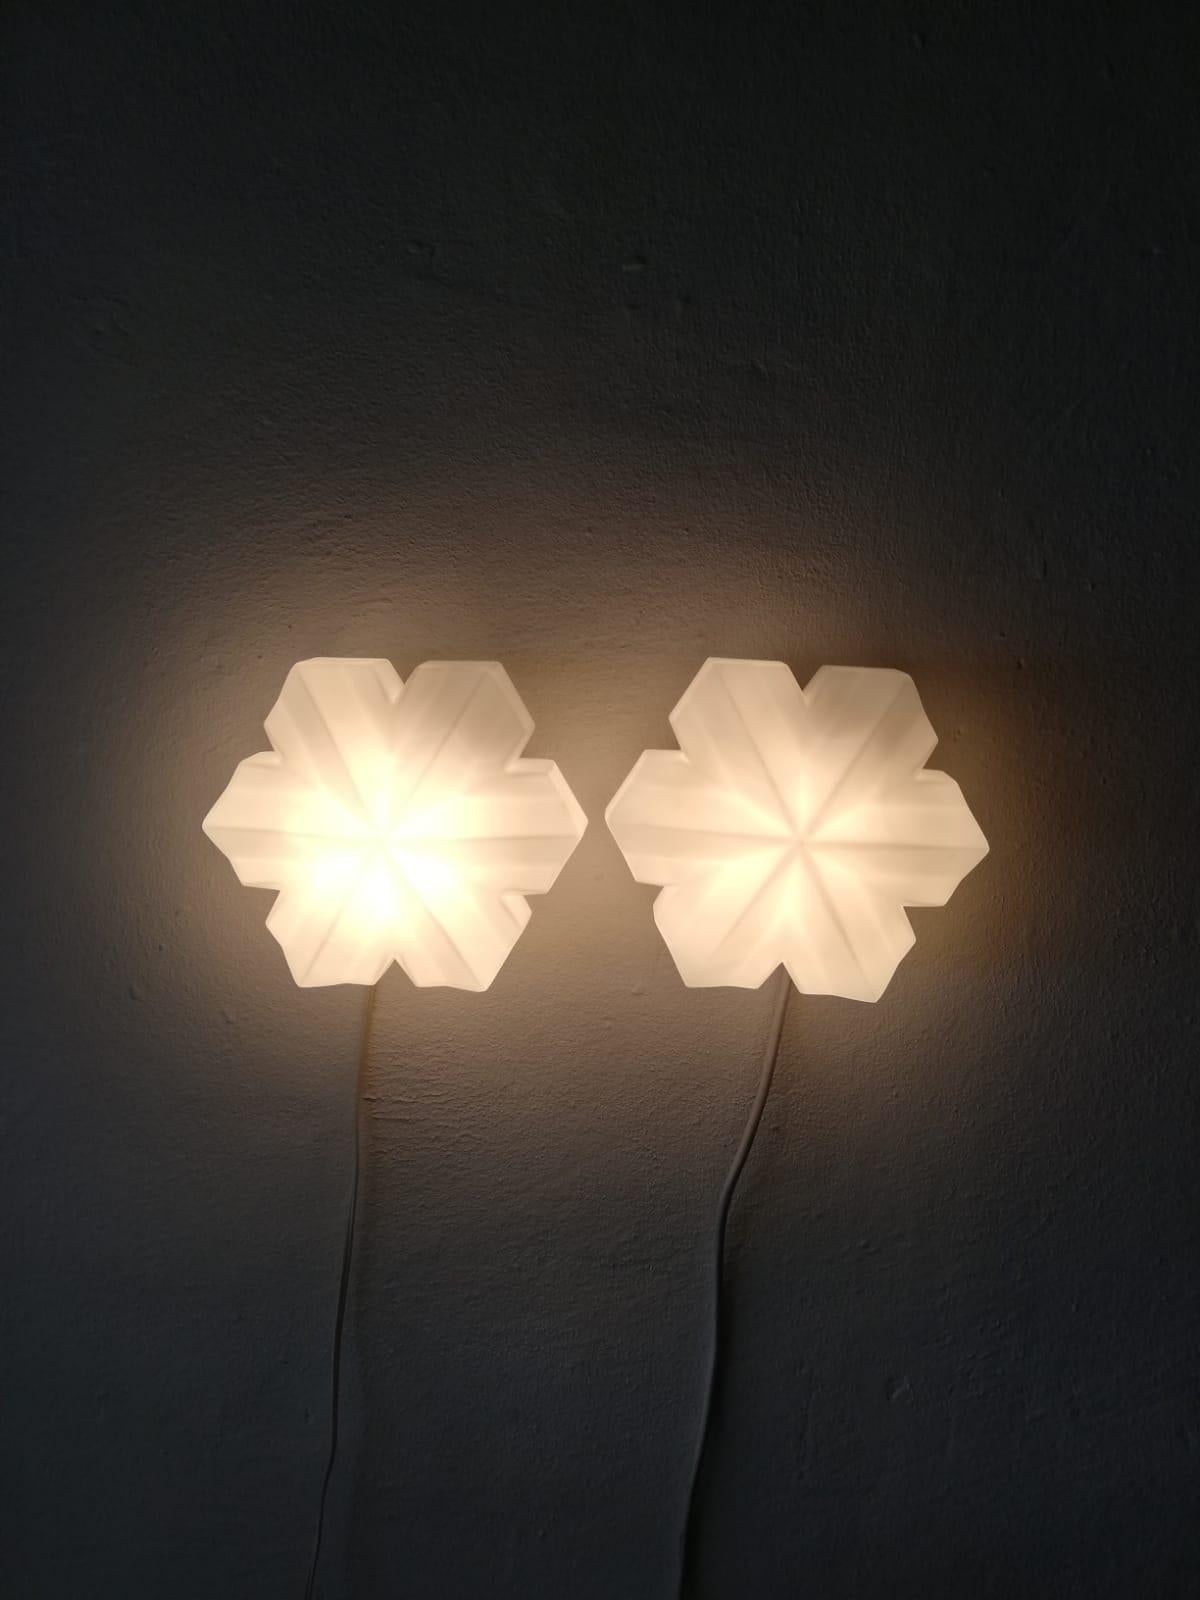 Mid-20th Century 3 Dimensional Hexagonal Opal Glass Pair of Wall Lamps by BEGA, 1960s Germany